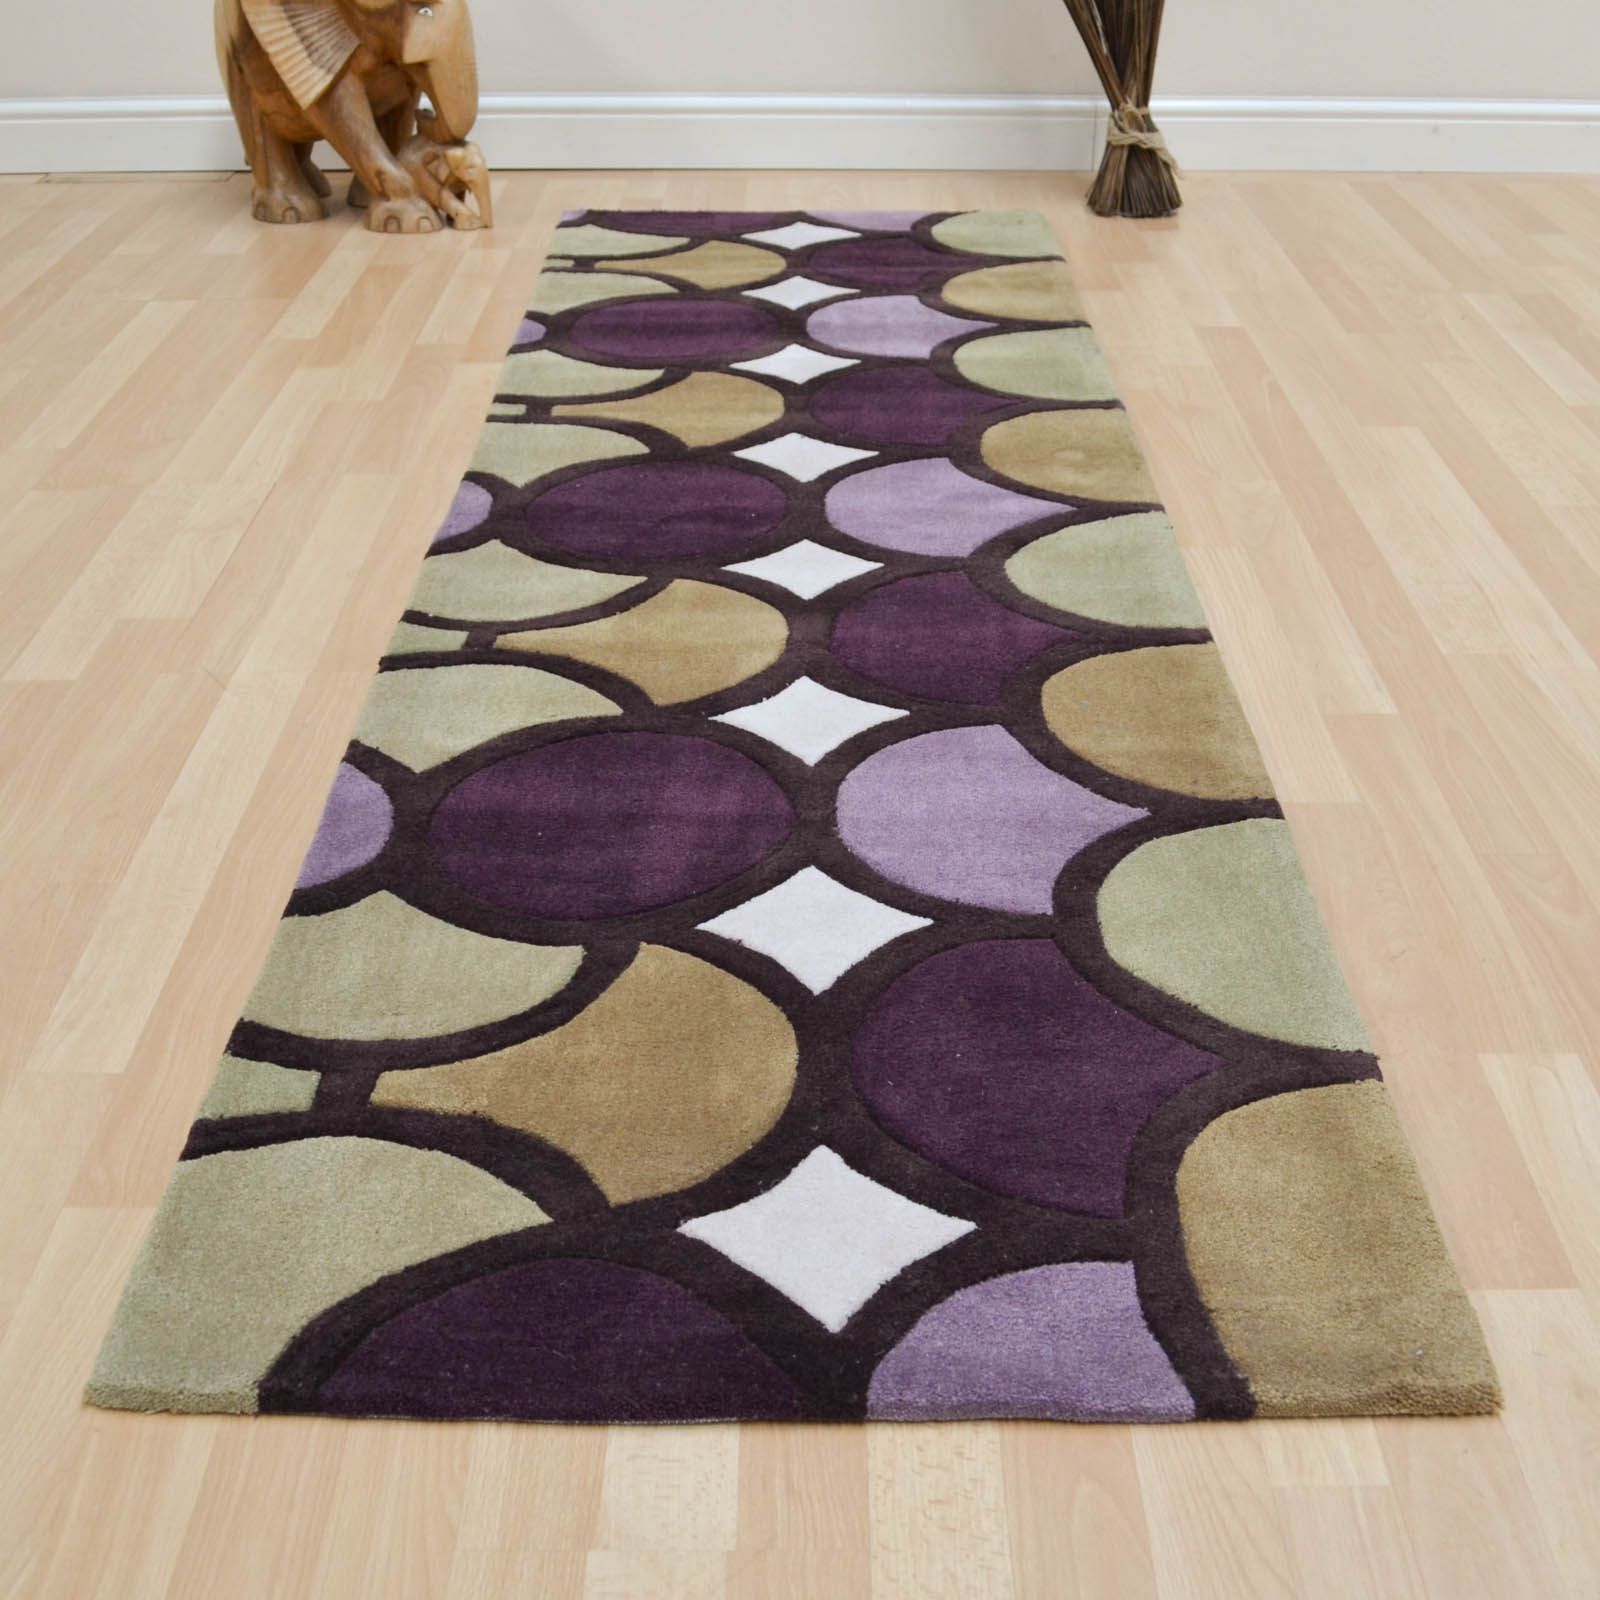 Hall Runner Rugs Uk Roselawnlutheran Intended For Hall Runners Green (View 3 of 20)